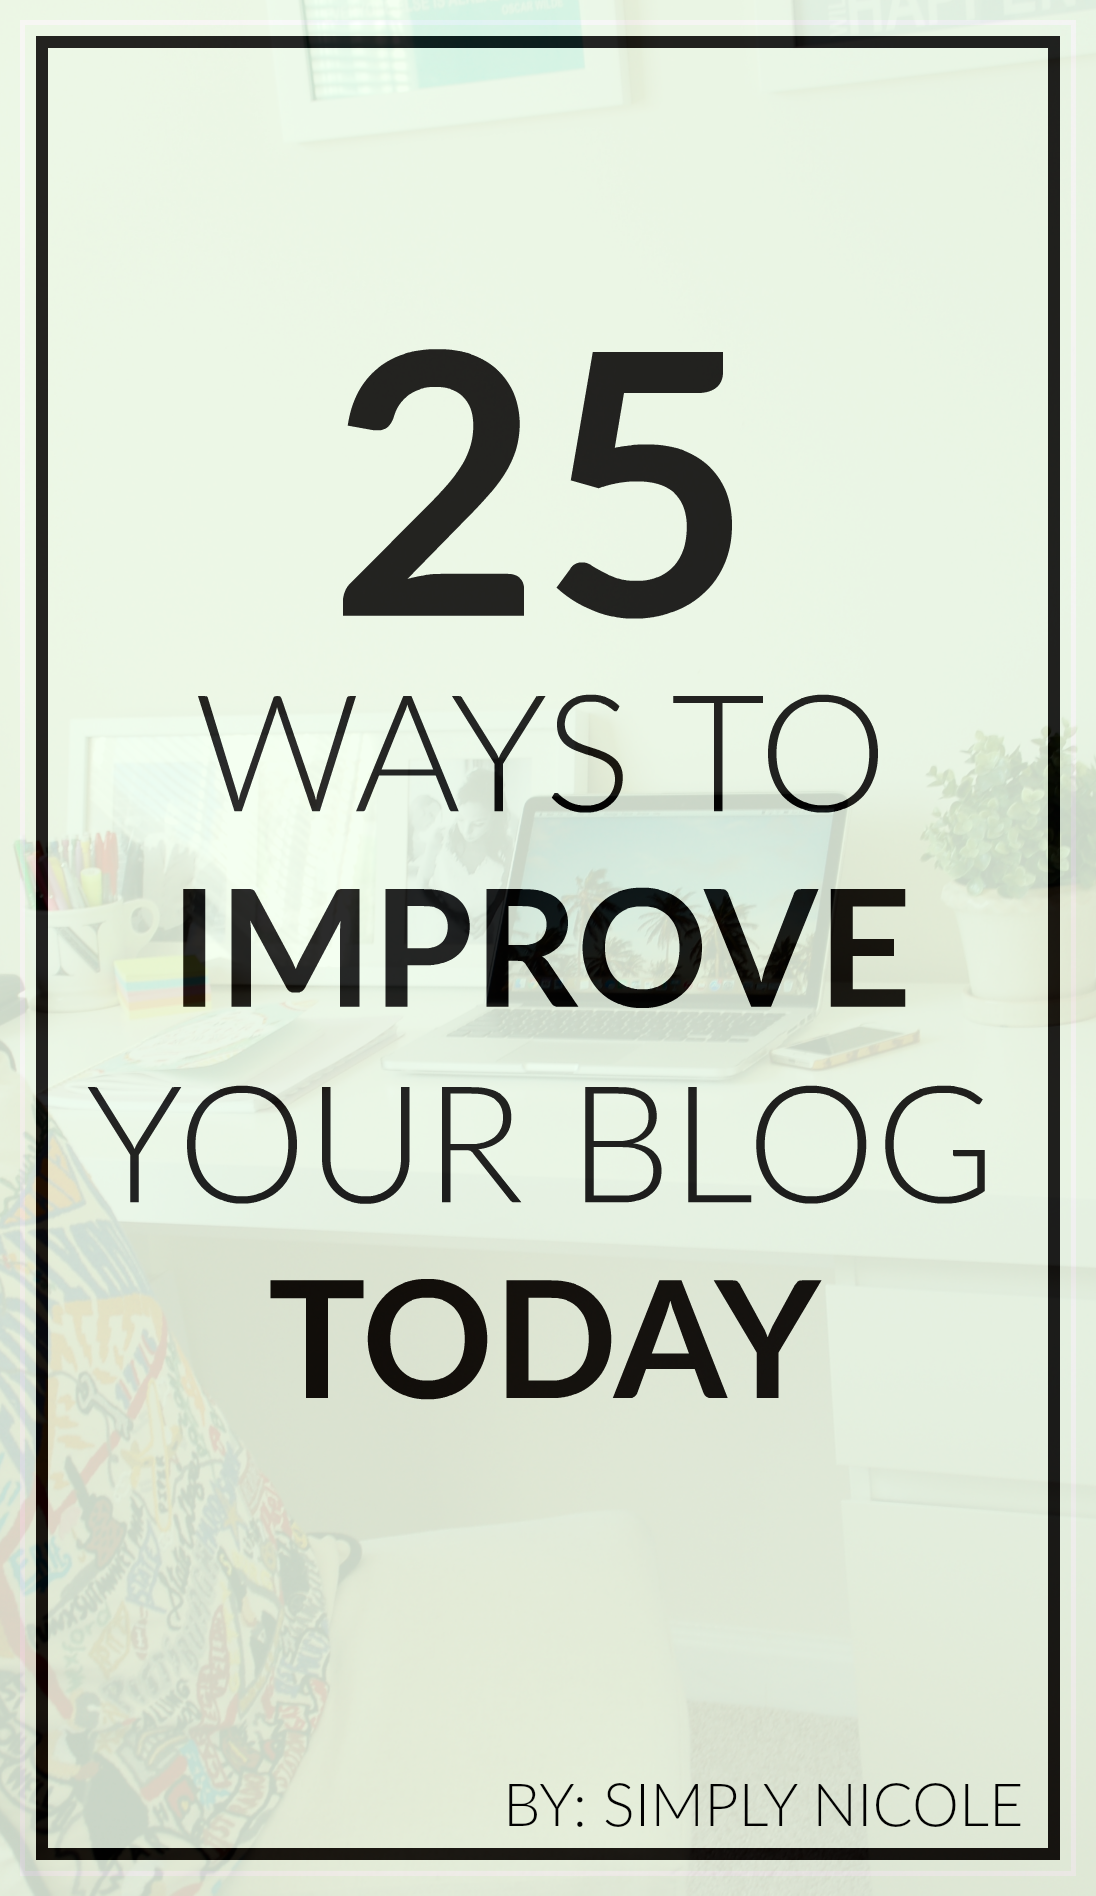 25 ways to improve your blog today